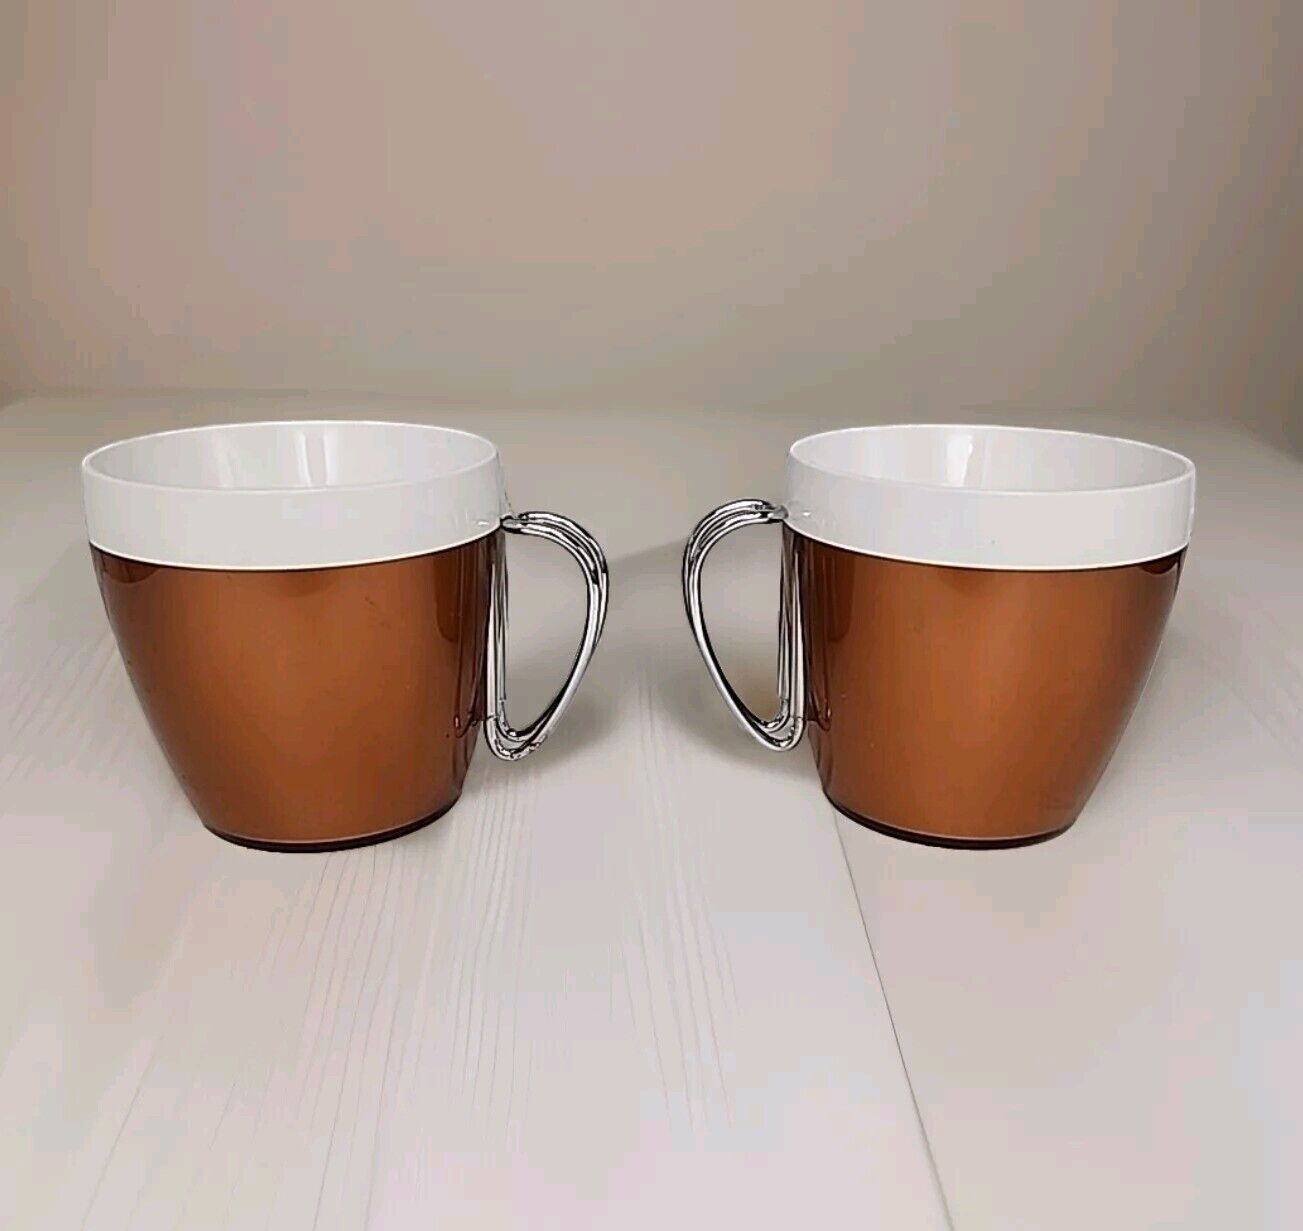 Set of 2 Vintage Nfc Thermal Drink Coffee Cups Mid-century 1960s Copper White